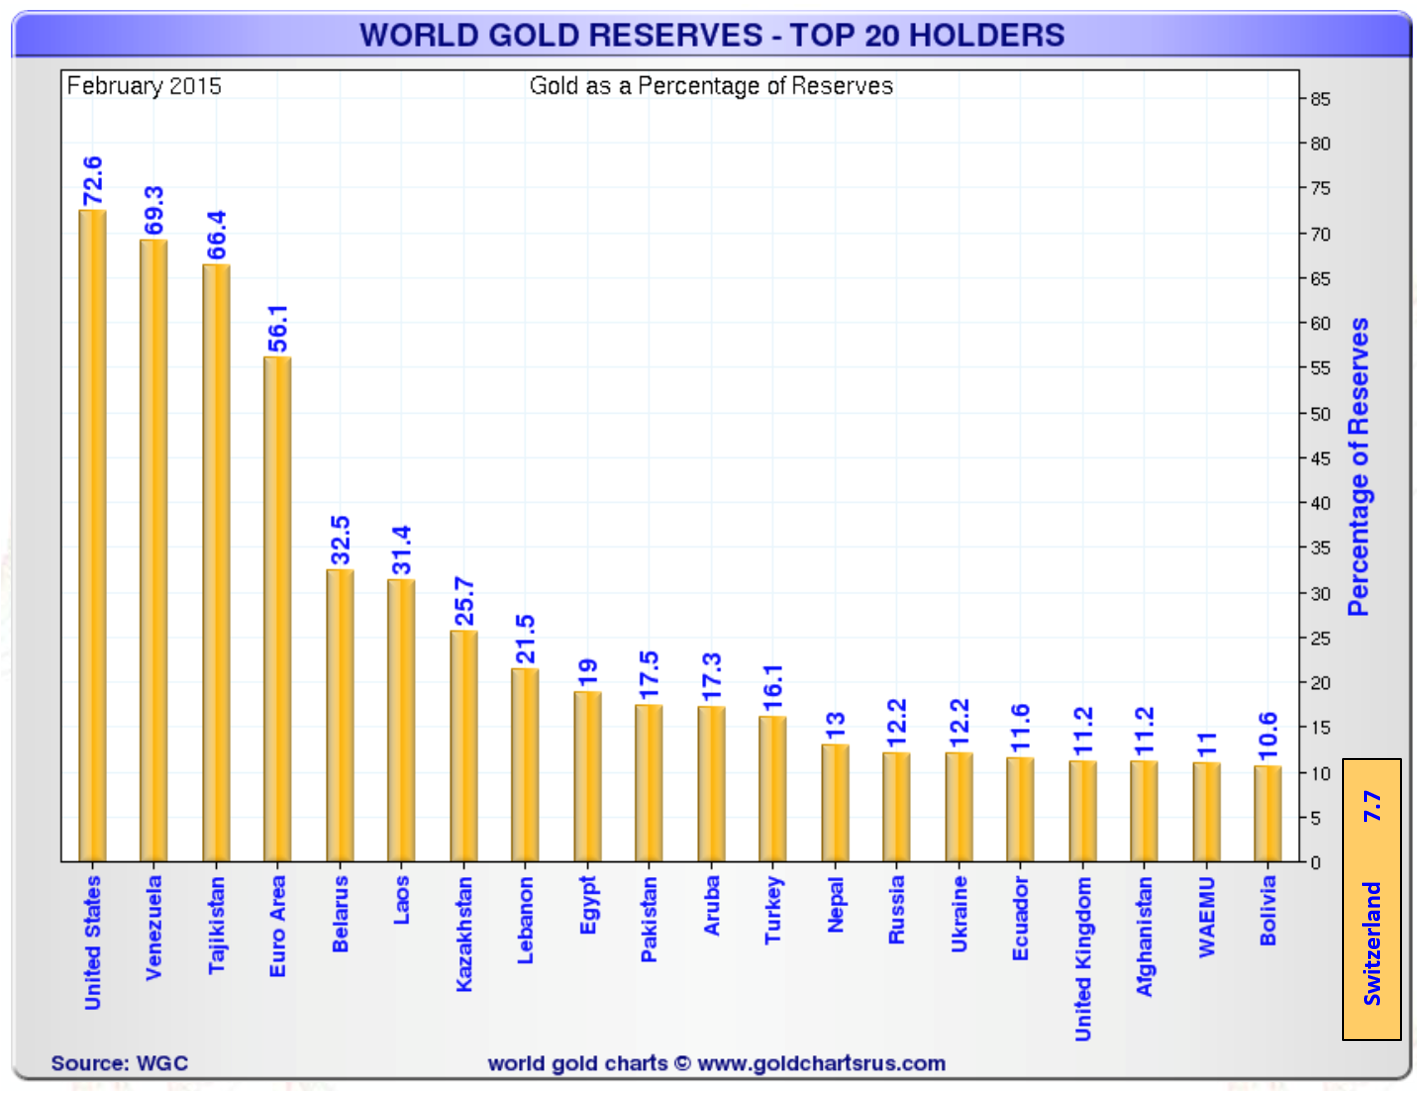 World Gold Reserves – Top 20 Holders (Percentage of Reserves)